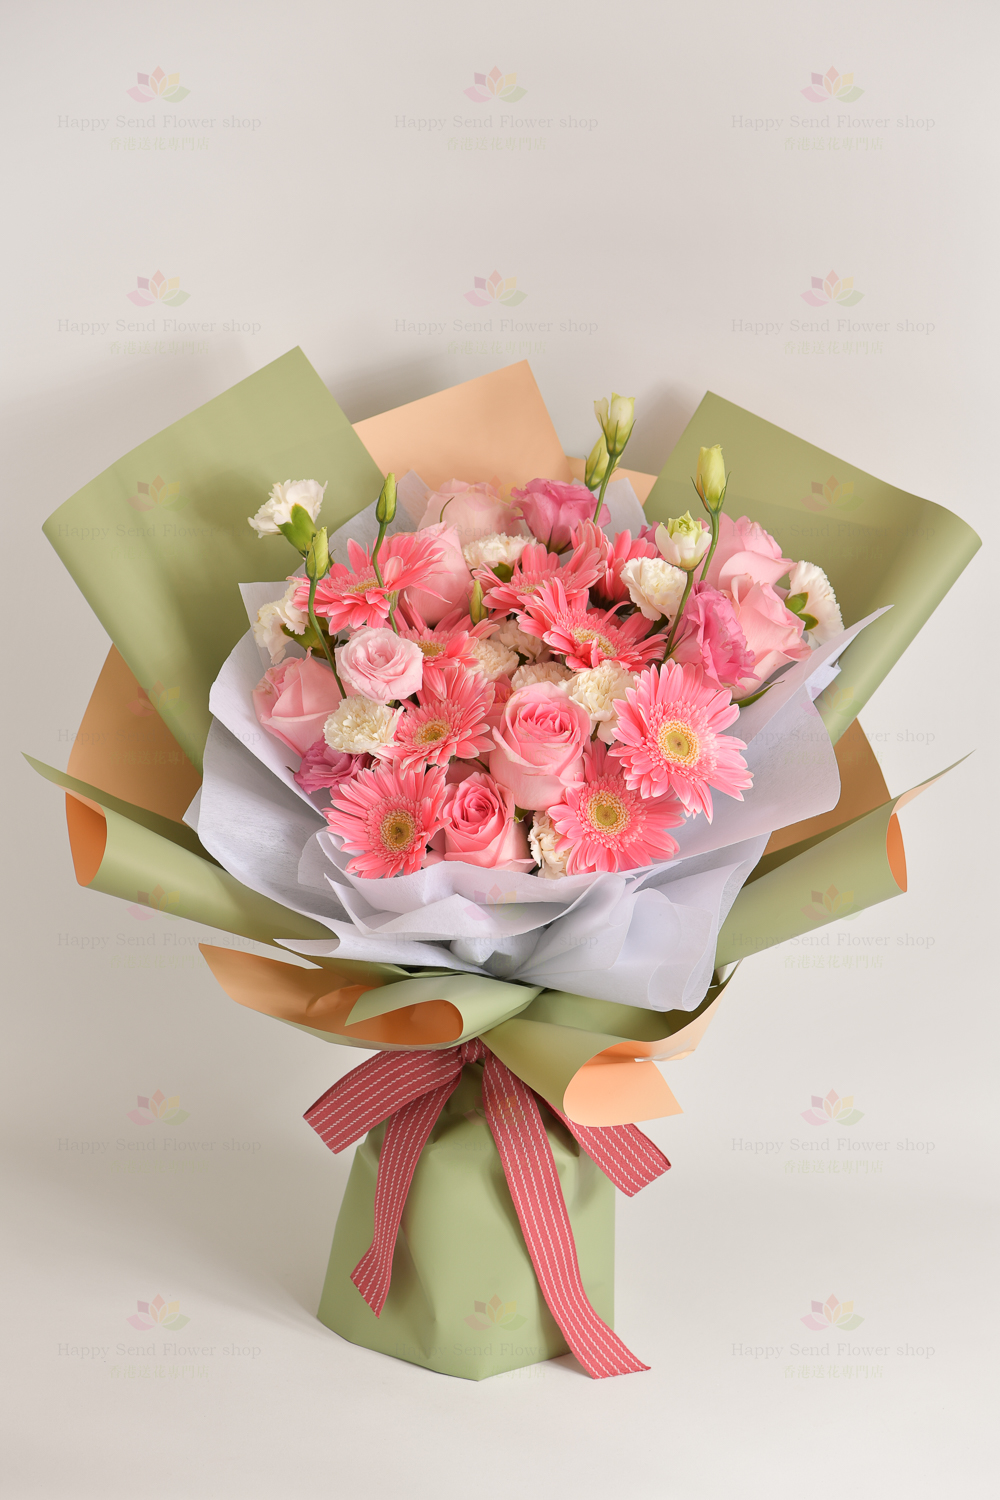 Fairy tale (pink gerbera, 8 pink roses, white carnations)